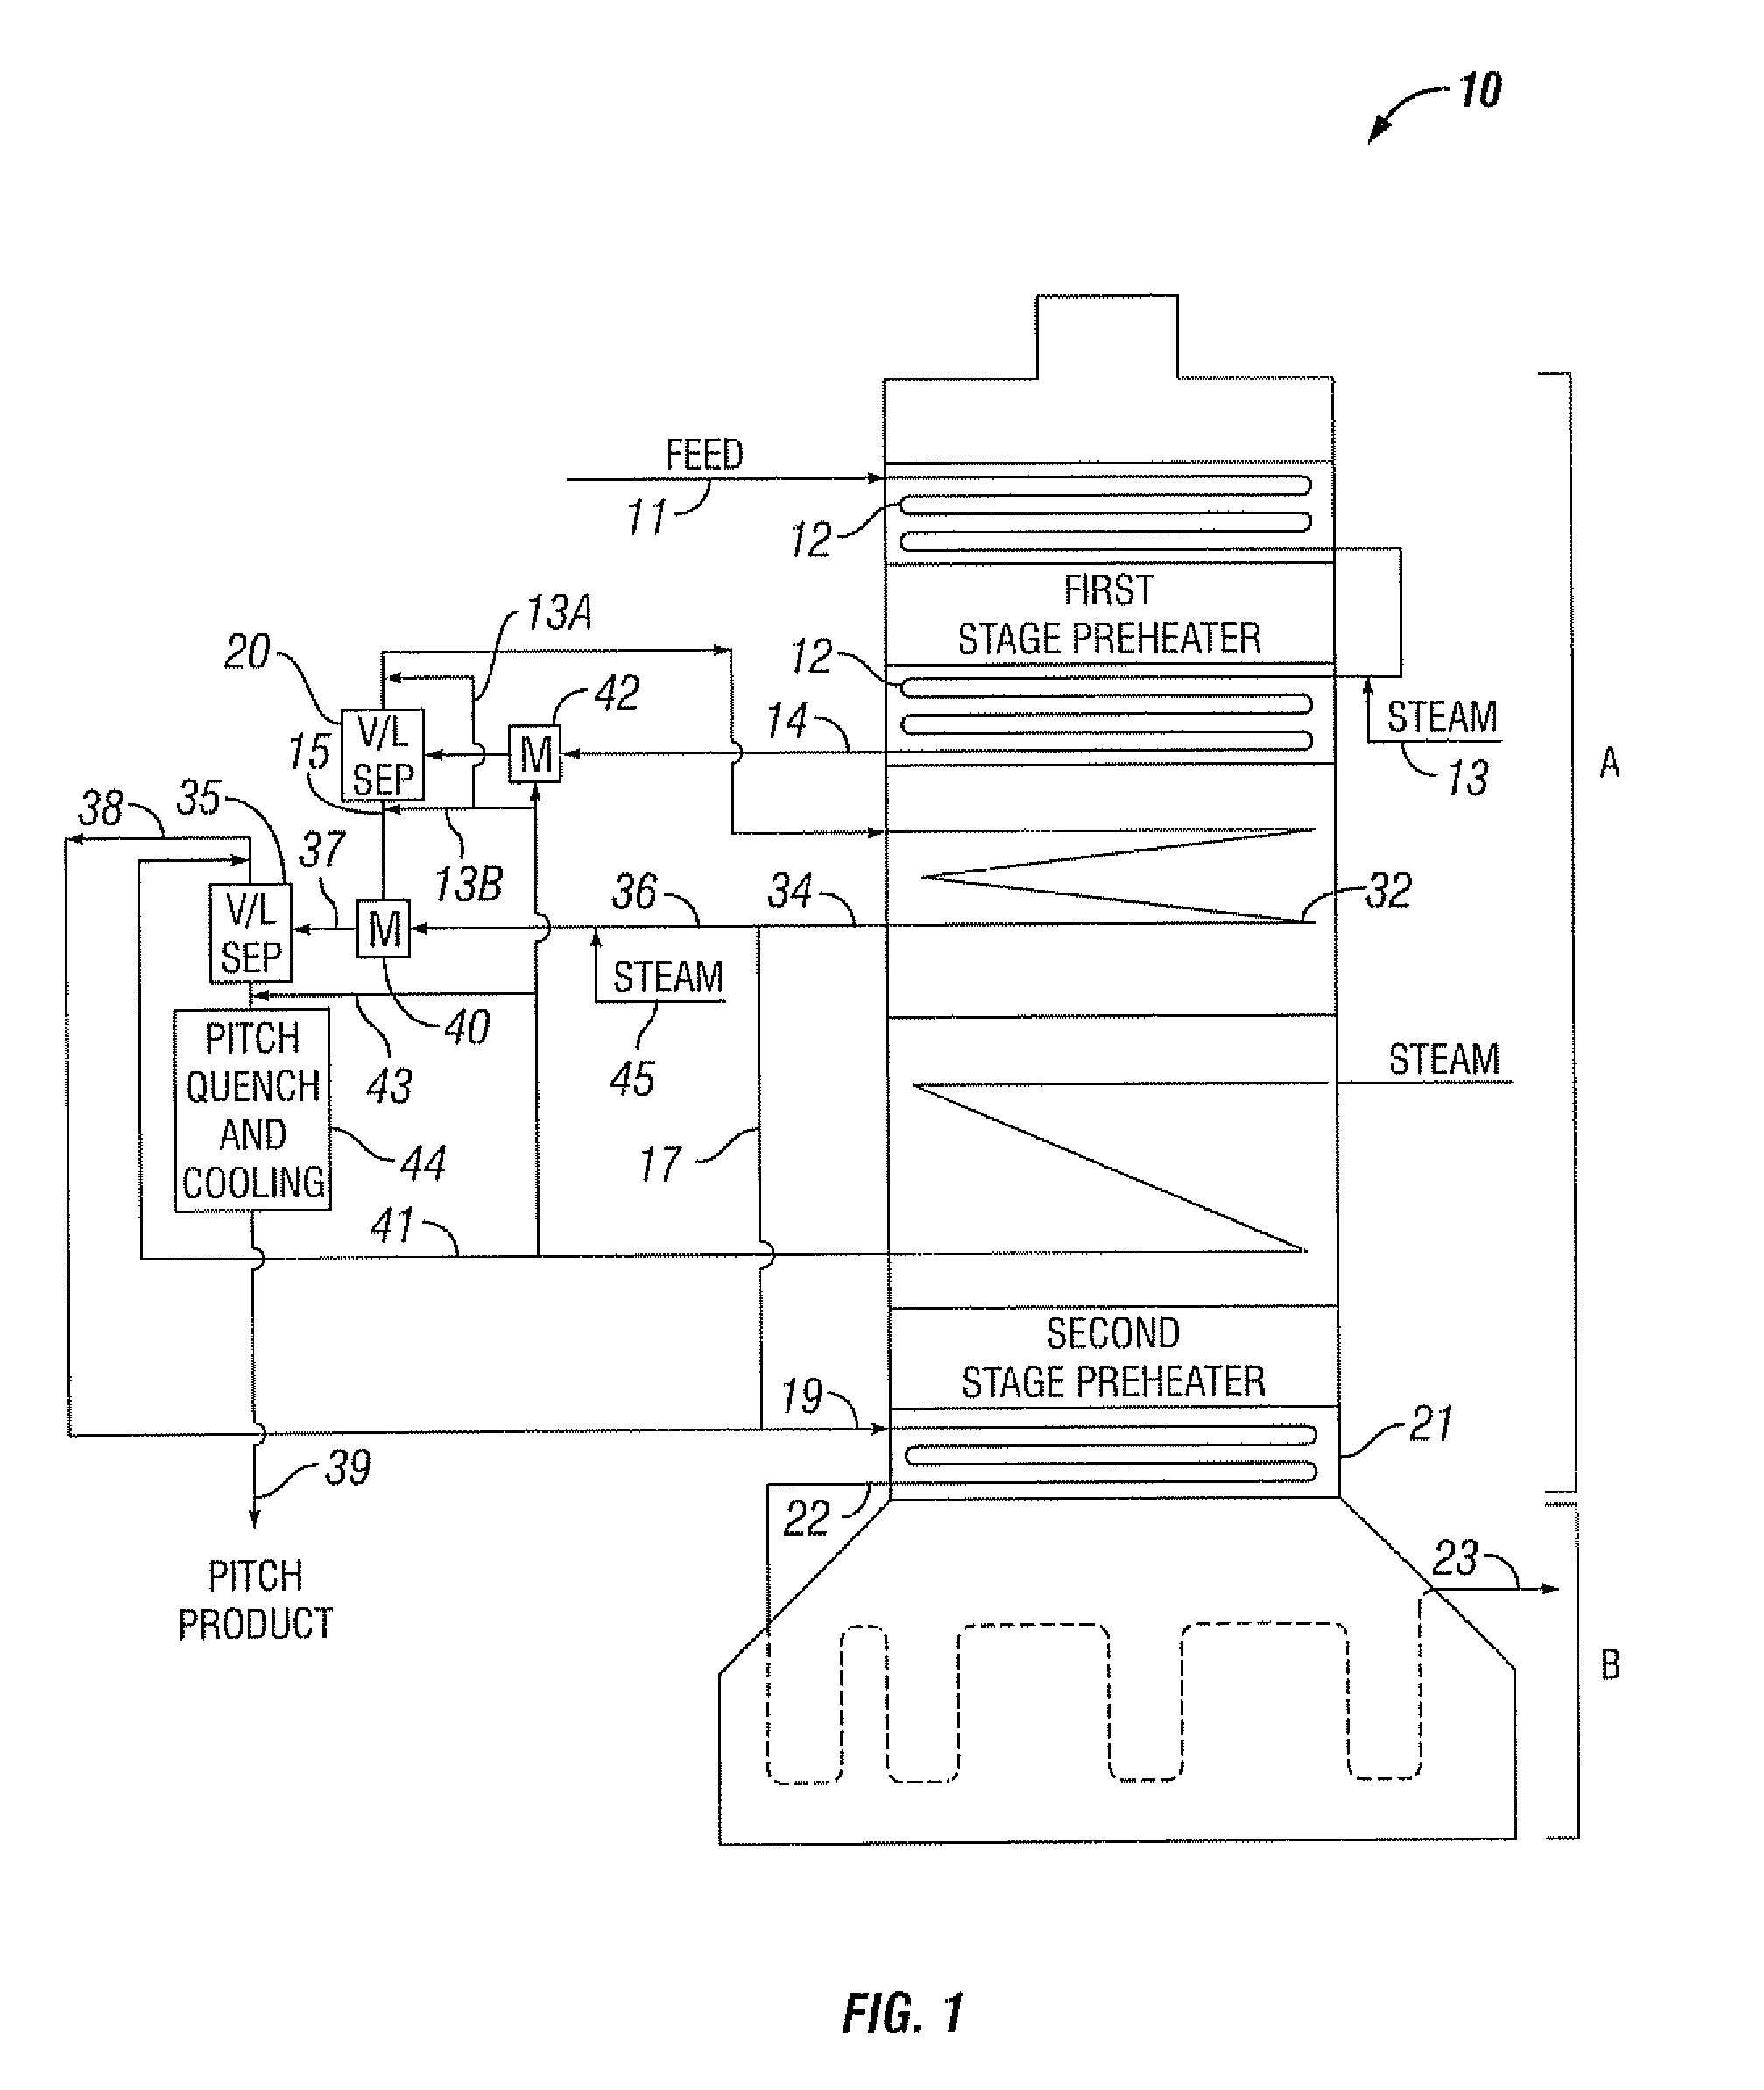 Process for producing lower olefins from heavy hydrocarbon feedstock utilizing two vapor/liquid separators